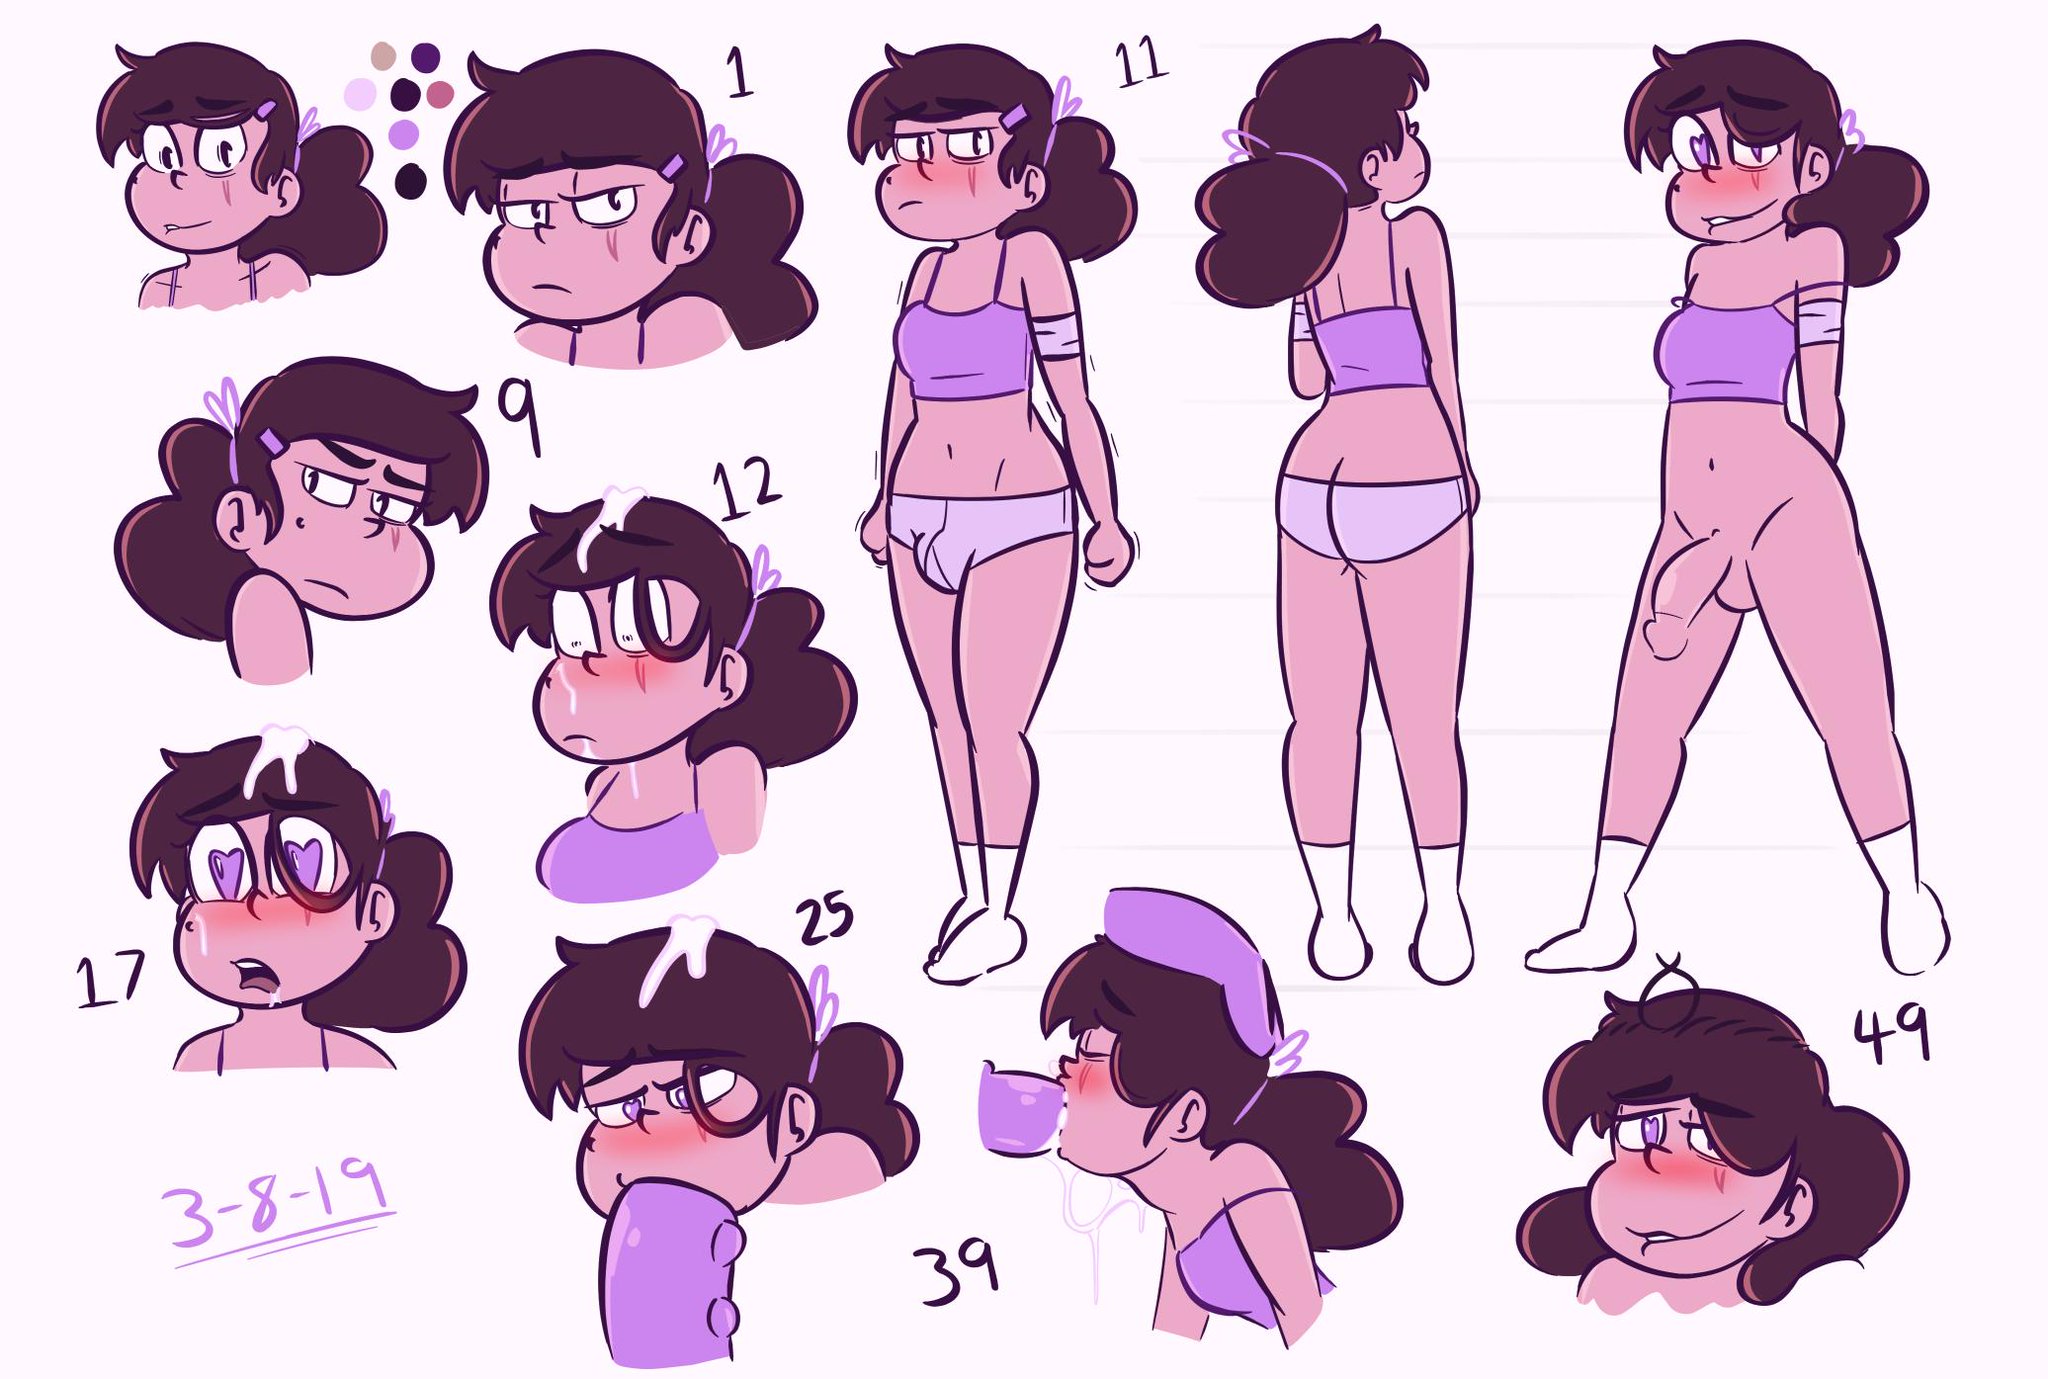 “Some updated refs for the Princess Marco animation. 